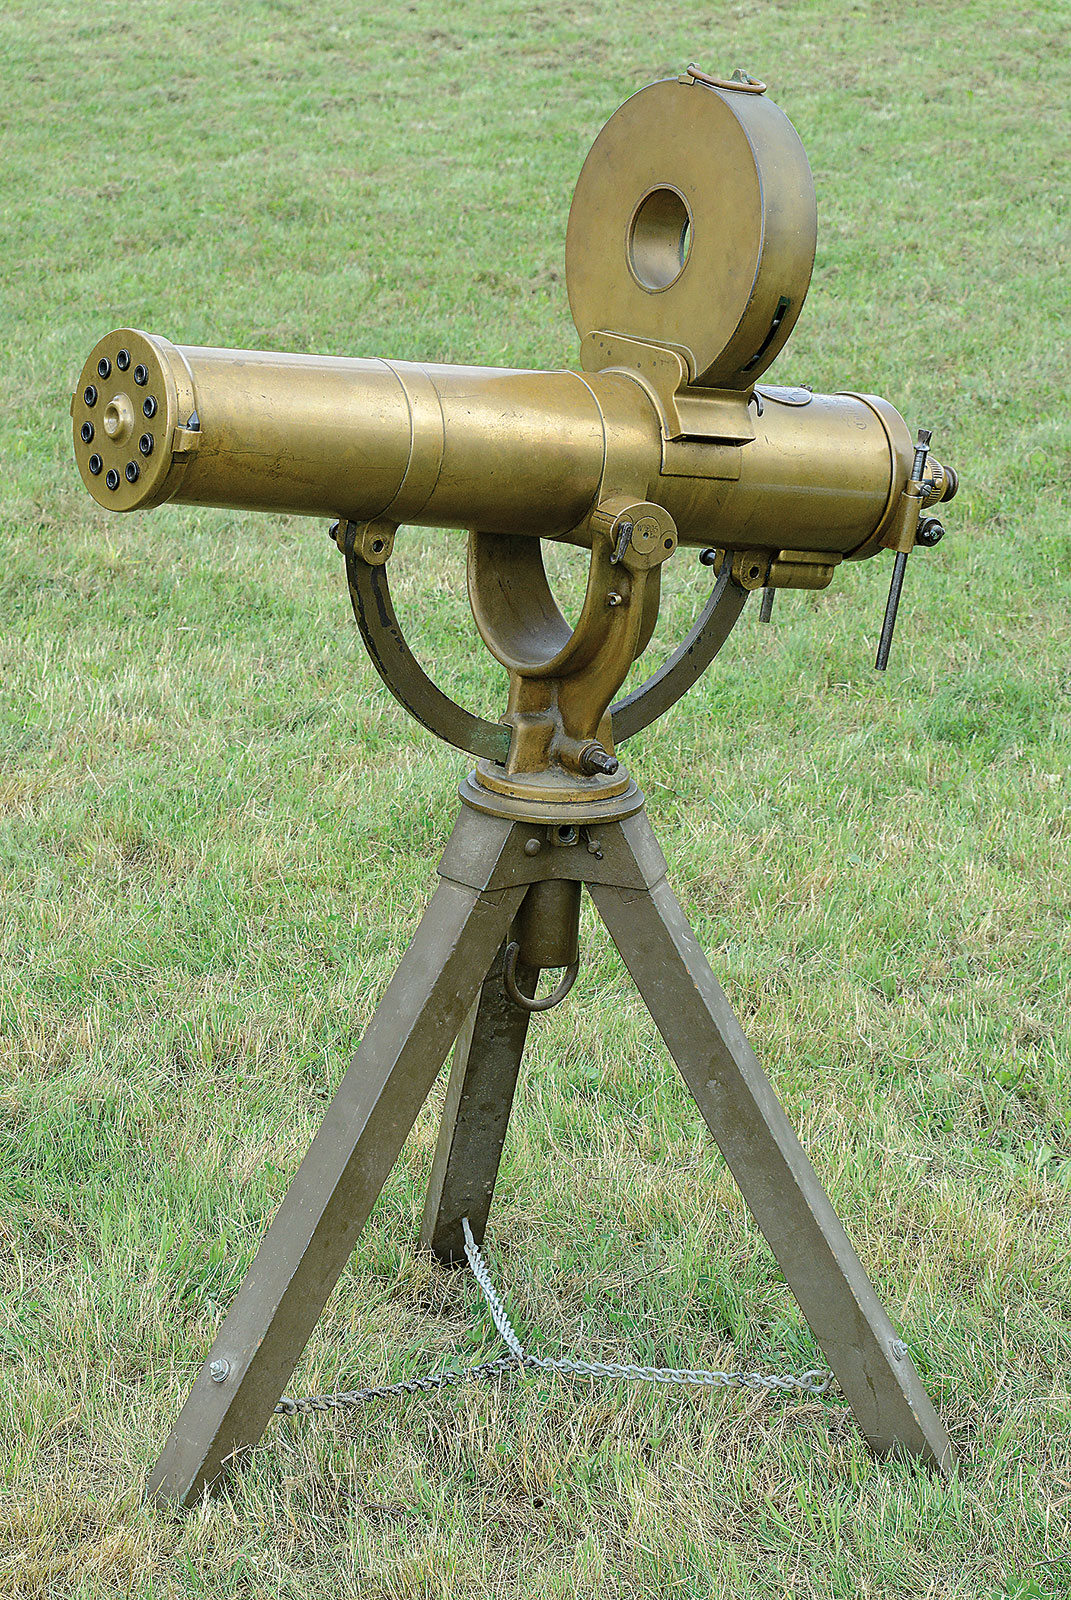 Colt Model 1883 U.S. Navy Gatling Gun on Tripod and Two Drums, Sold for $346,150